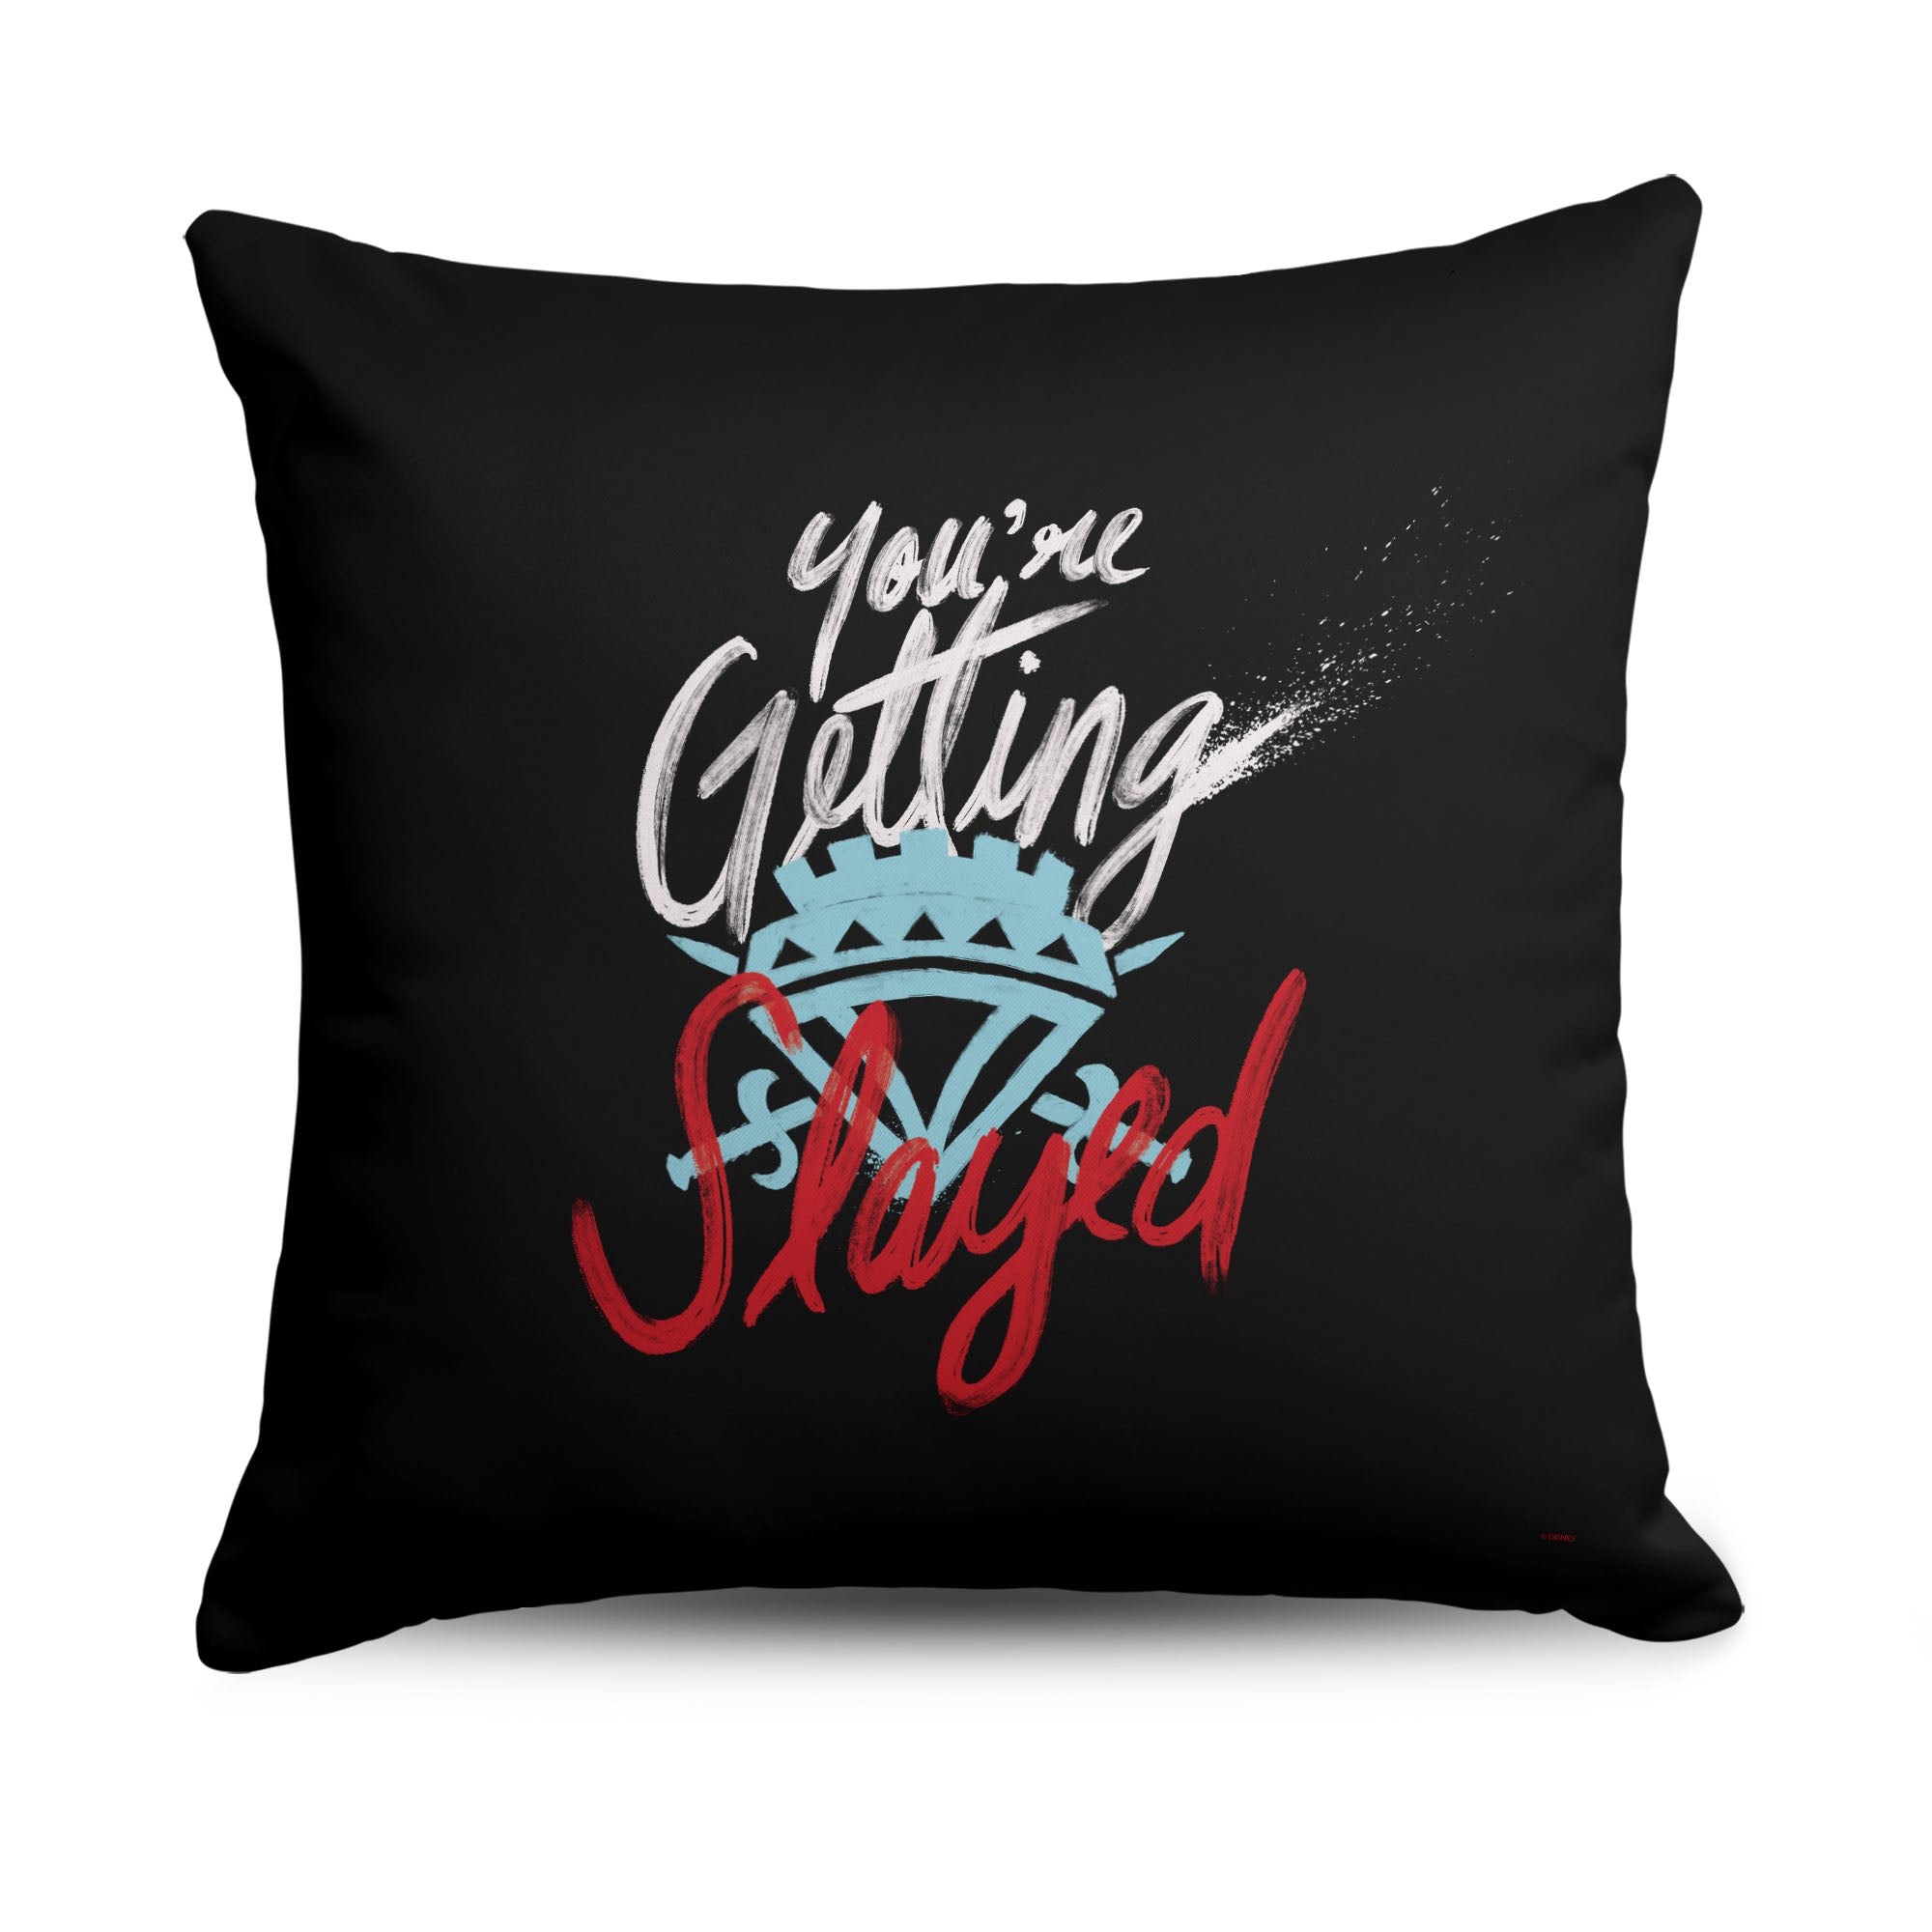 Disney Descendants Getting Slayed Throw Pillow 18x18 Inches